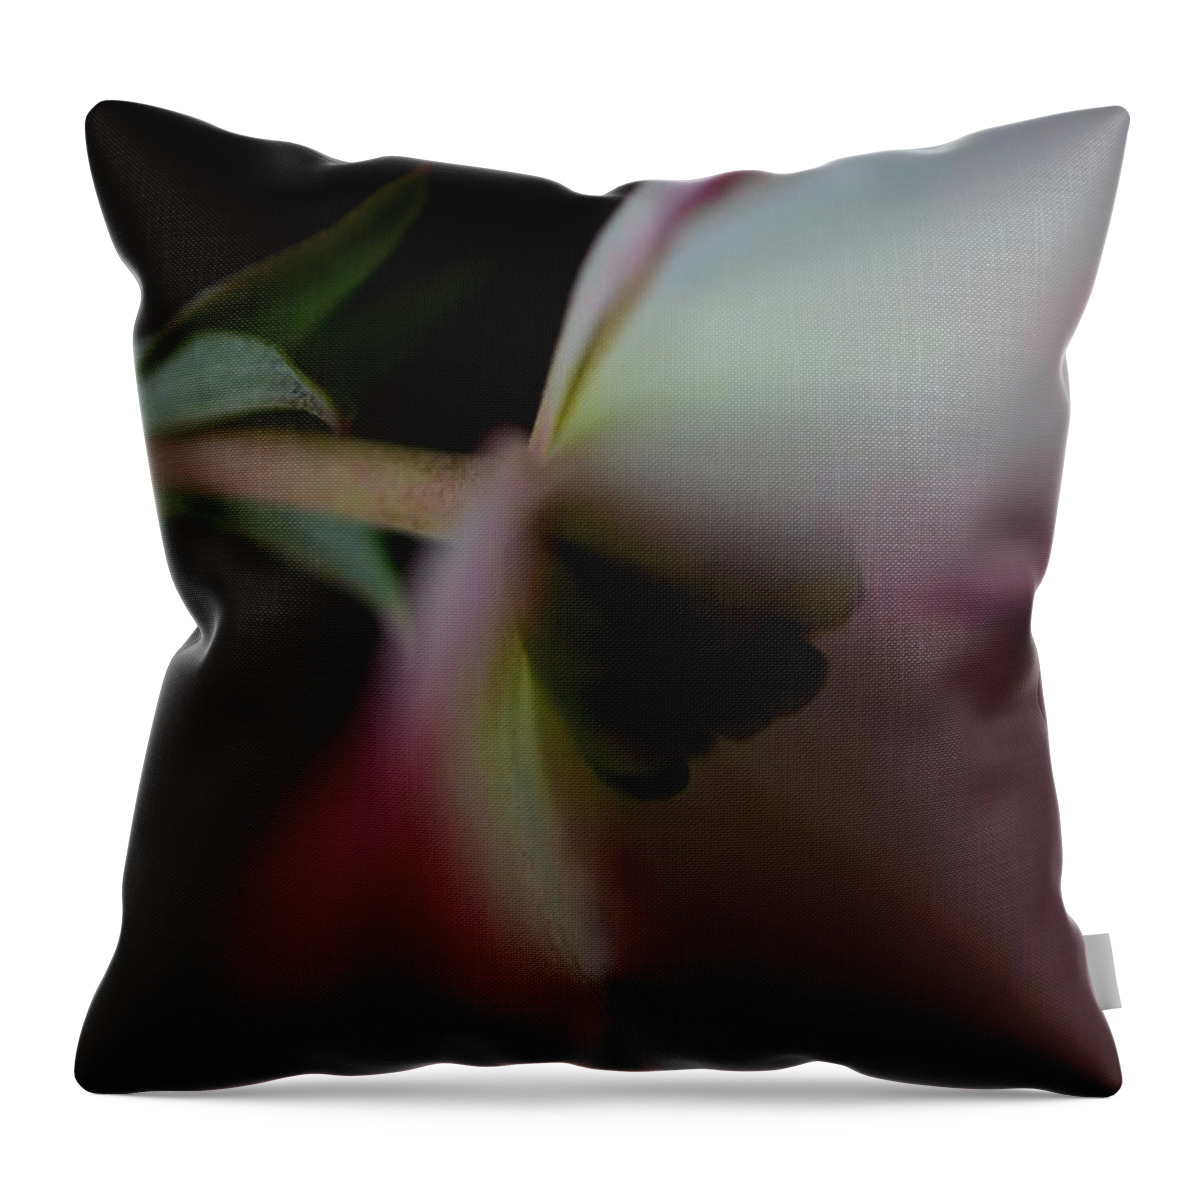 Dogwood Throw Pillow featuring the photograph Dogwood Flower by Marianna Mills